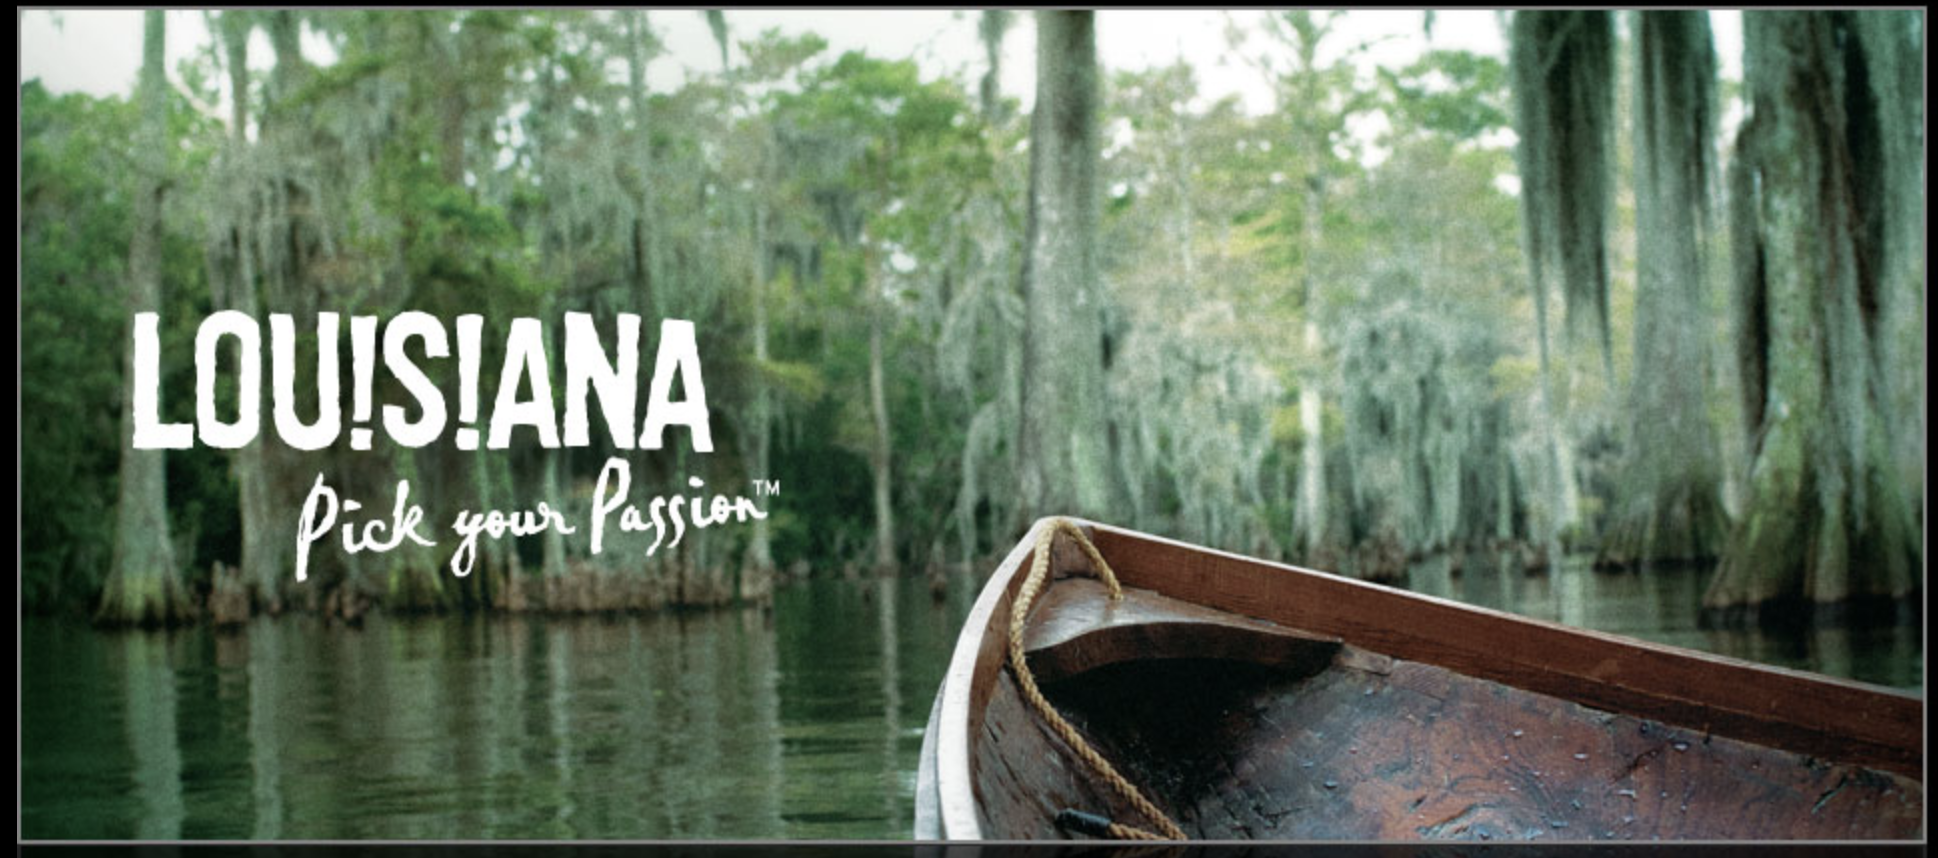 Louisiana Culture Recreation and Tourism | Peter Mayer Advertising